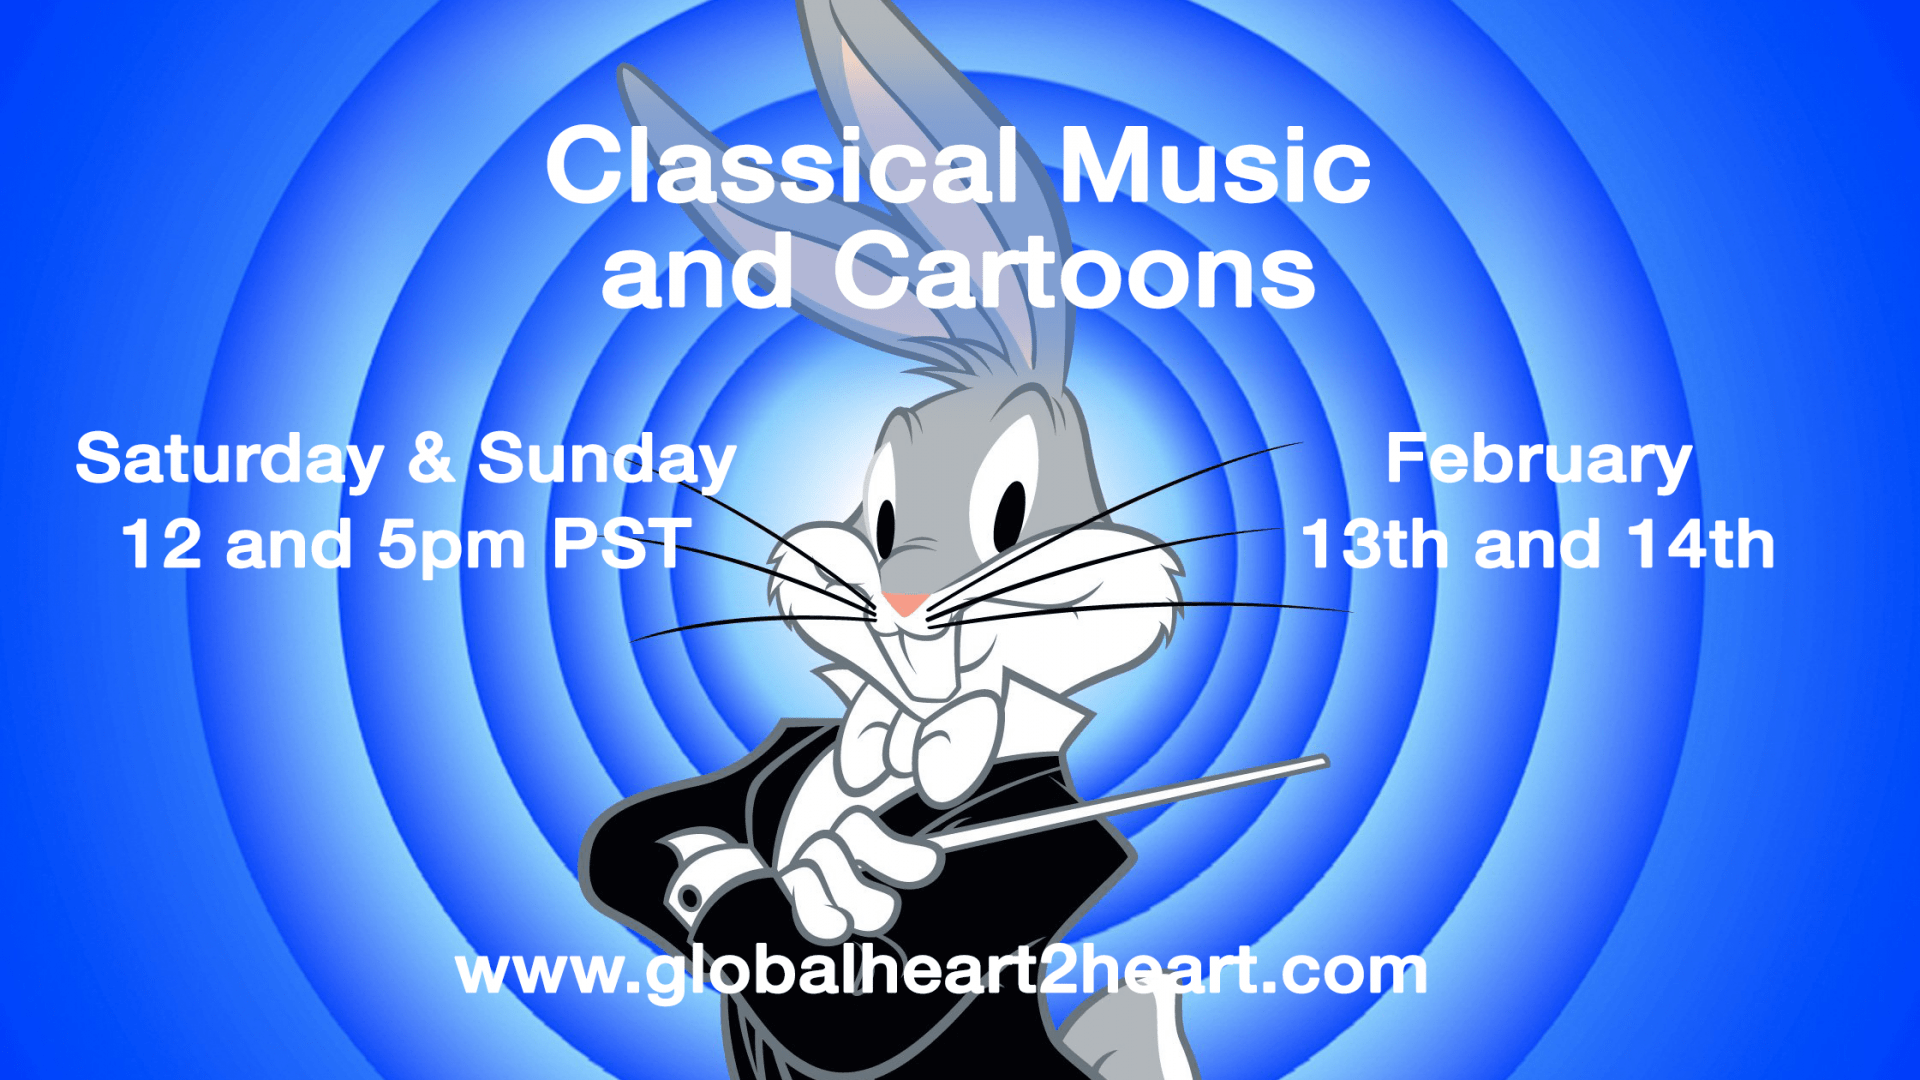 Classical Music and Cartoons this Weekend February 13 and 14th